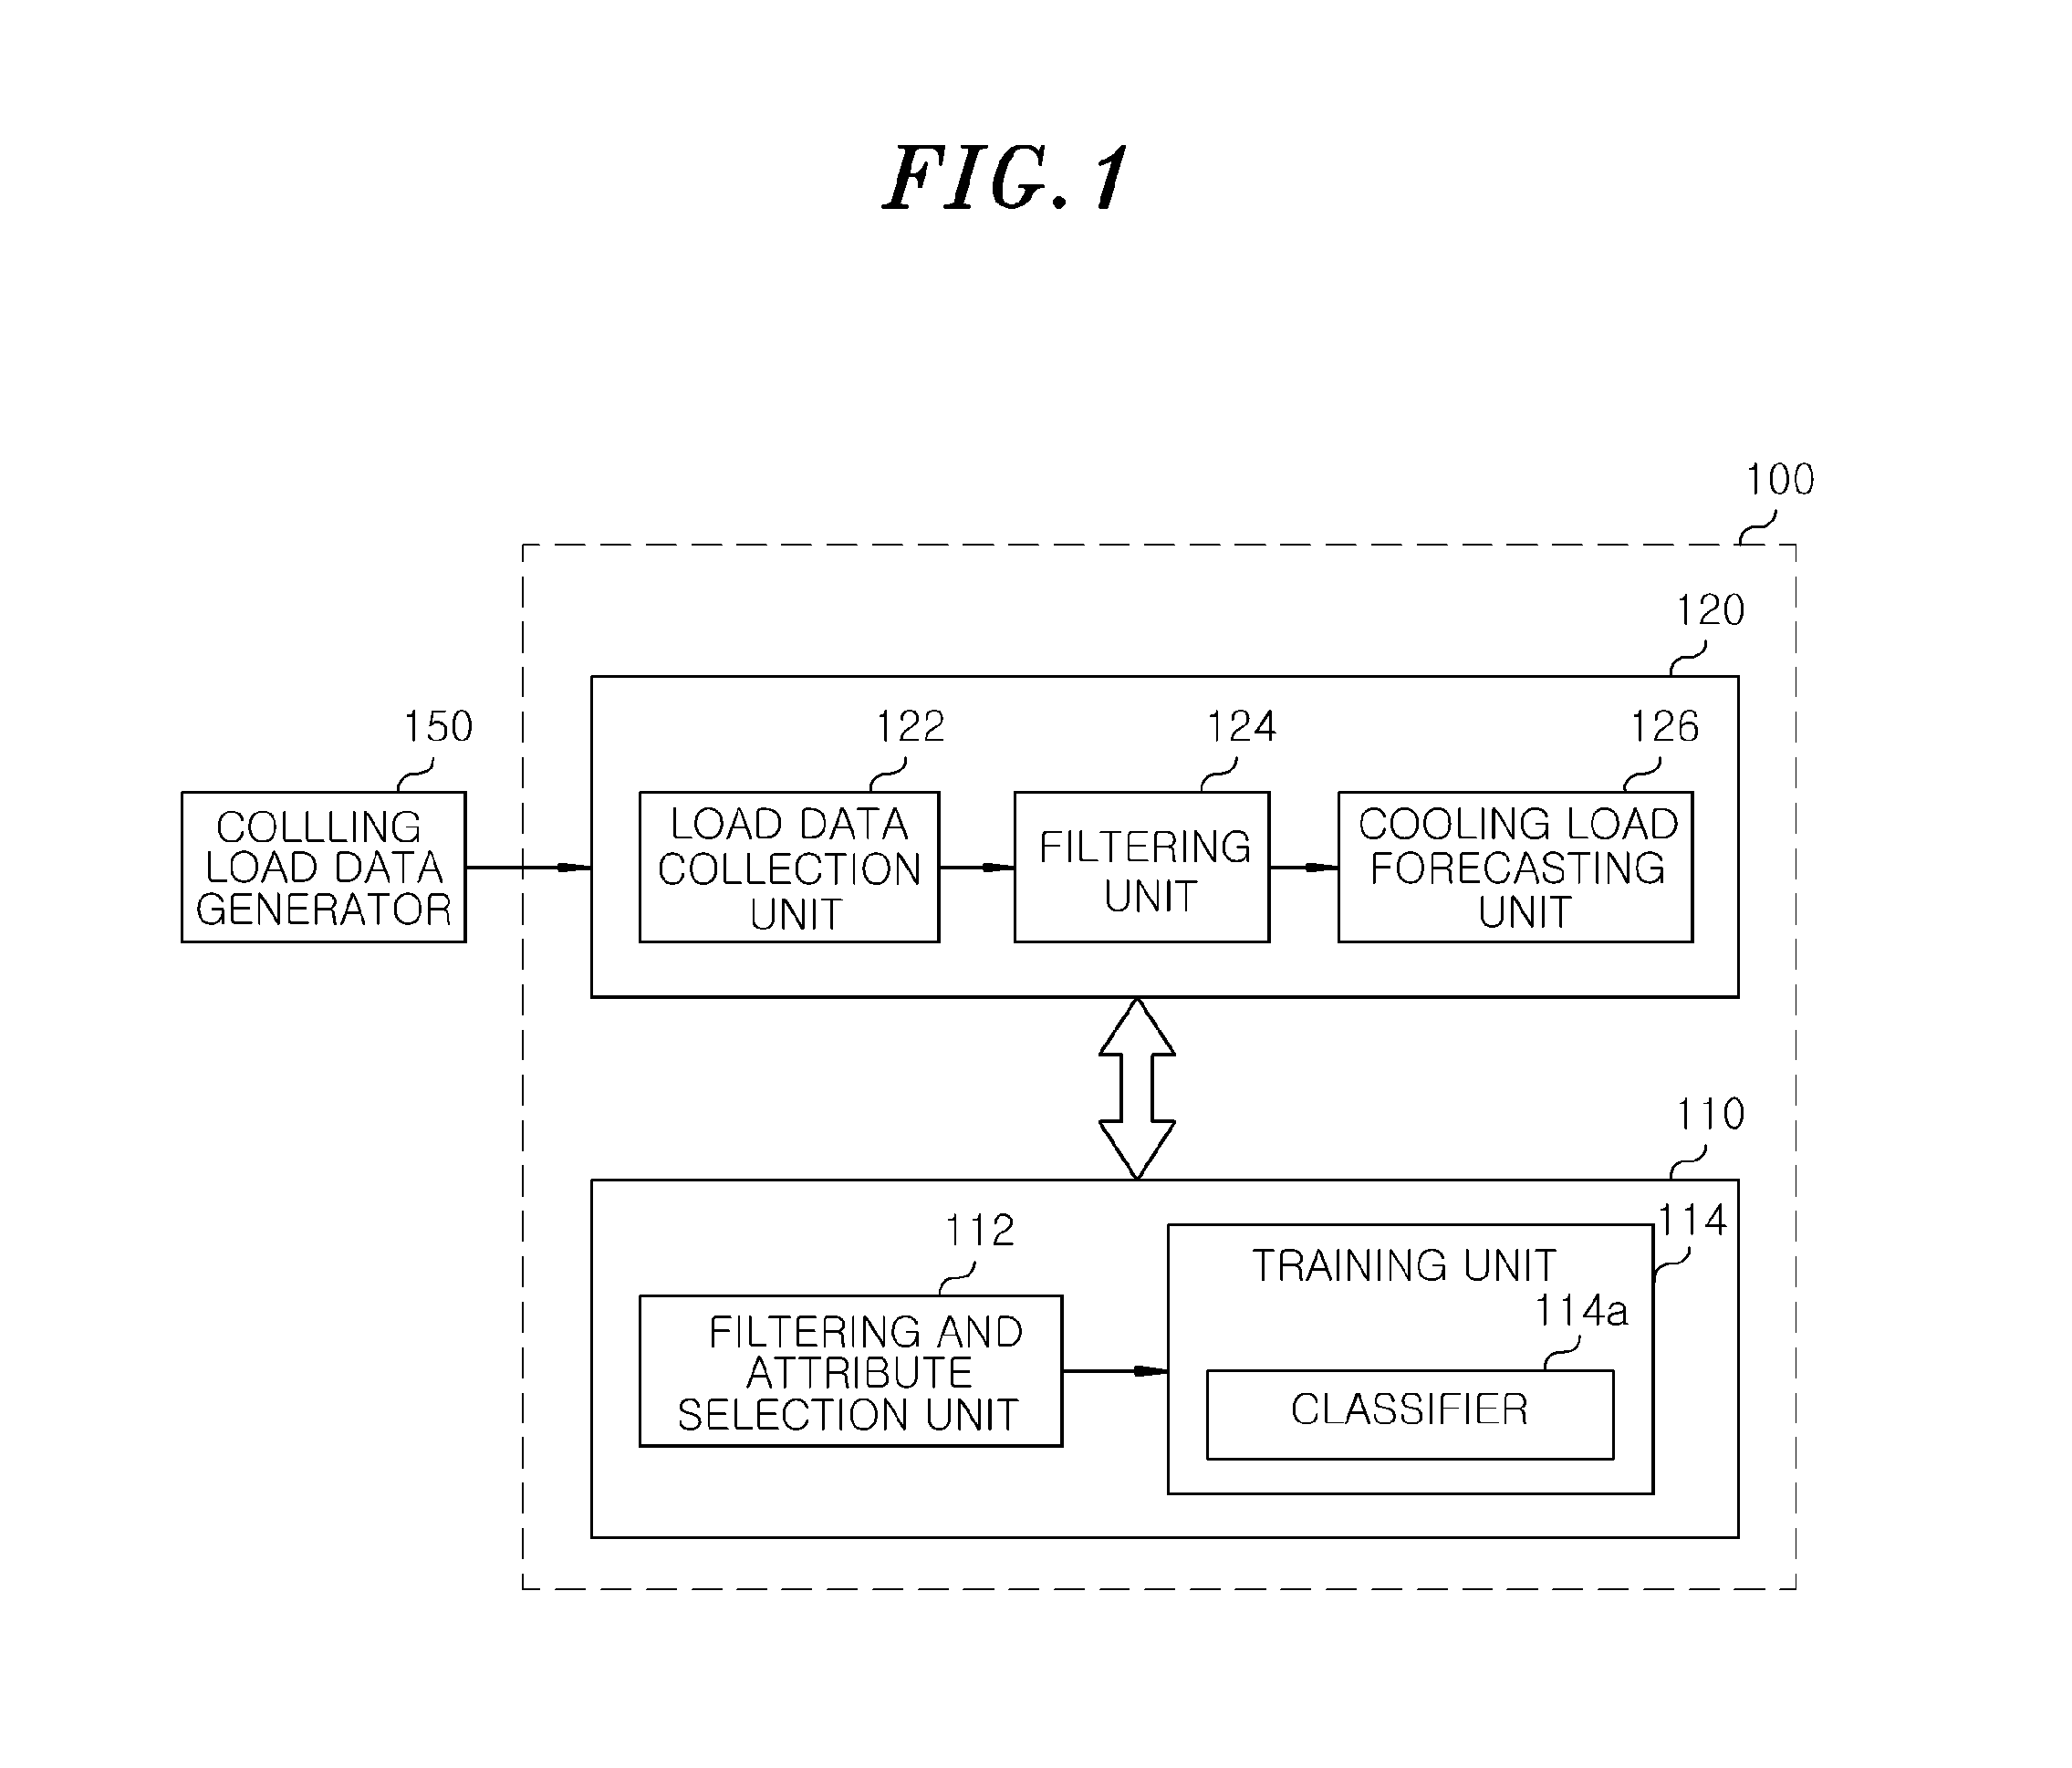 Apparatus and method for forecasting energy consumption